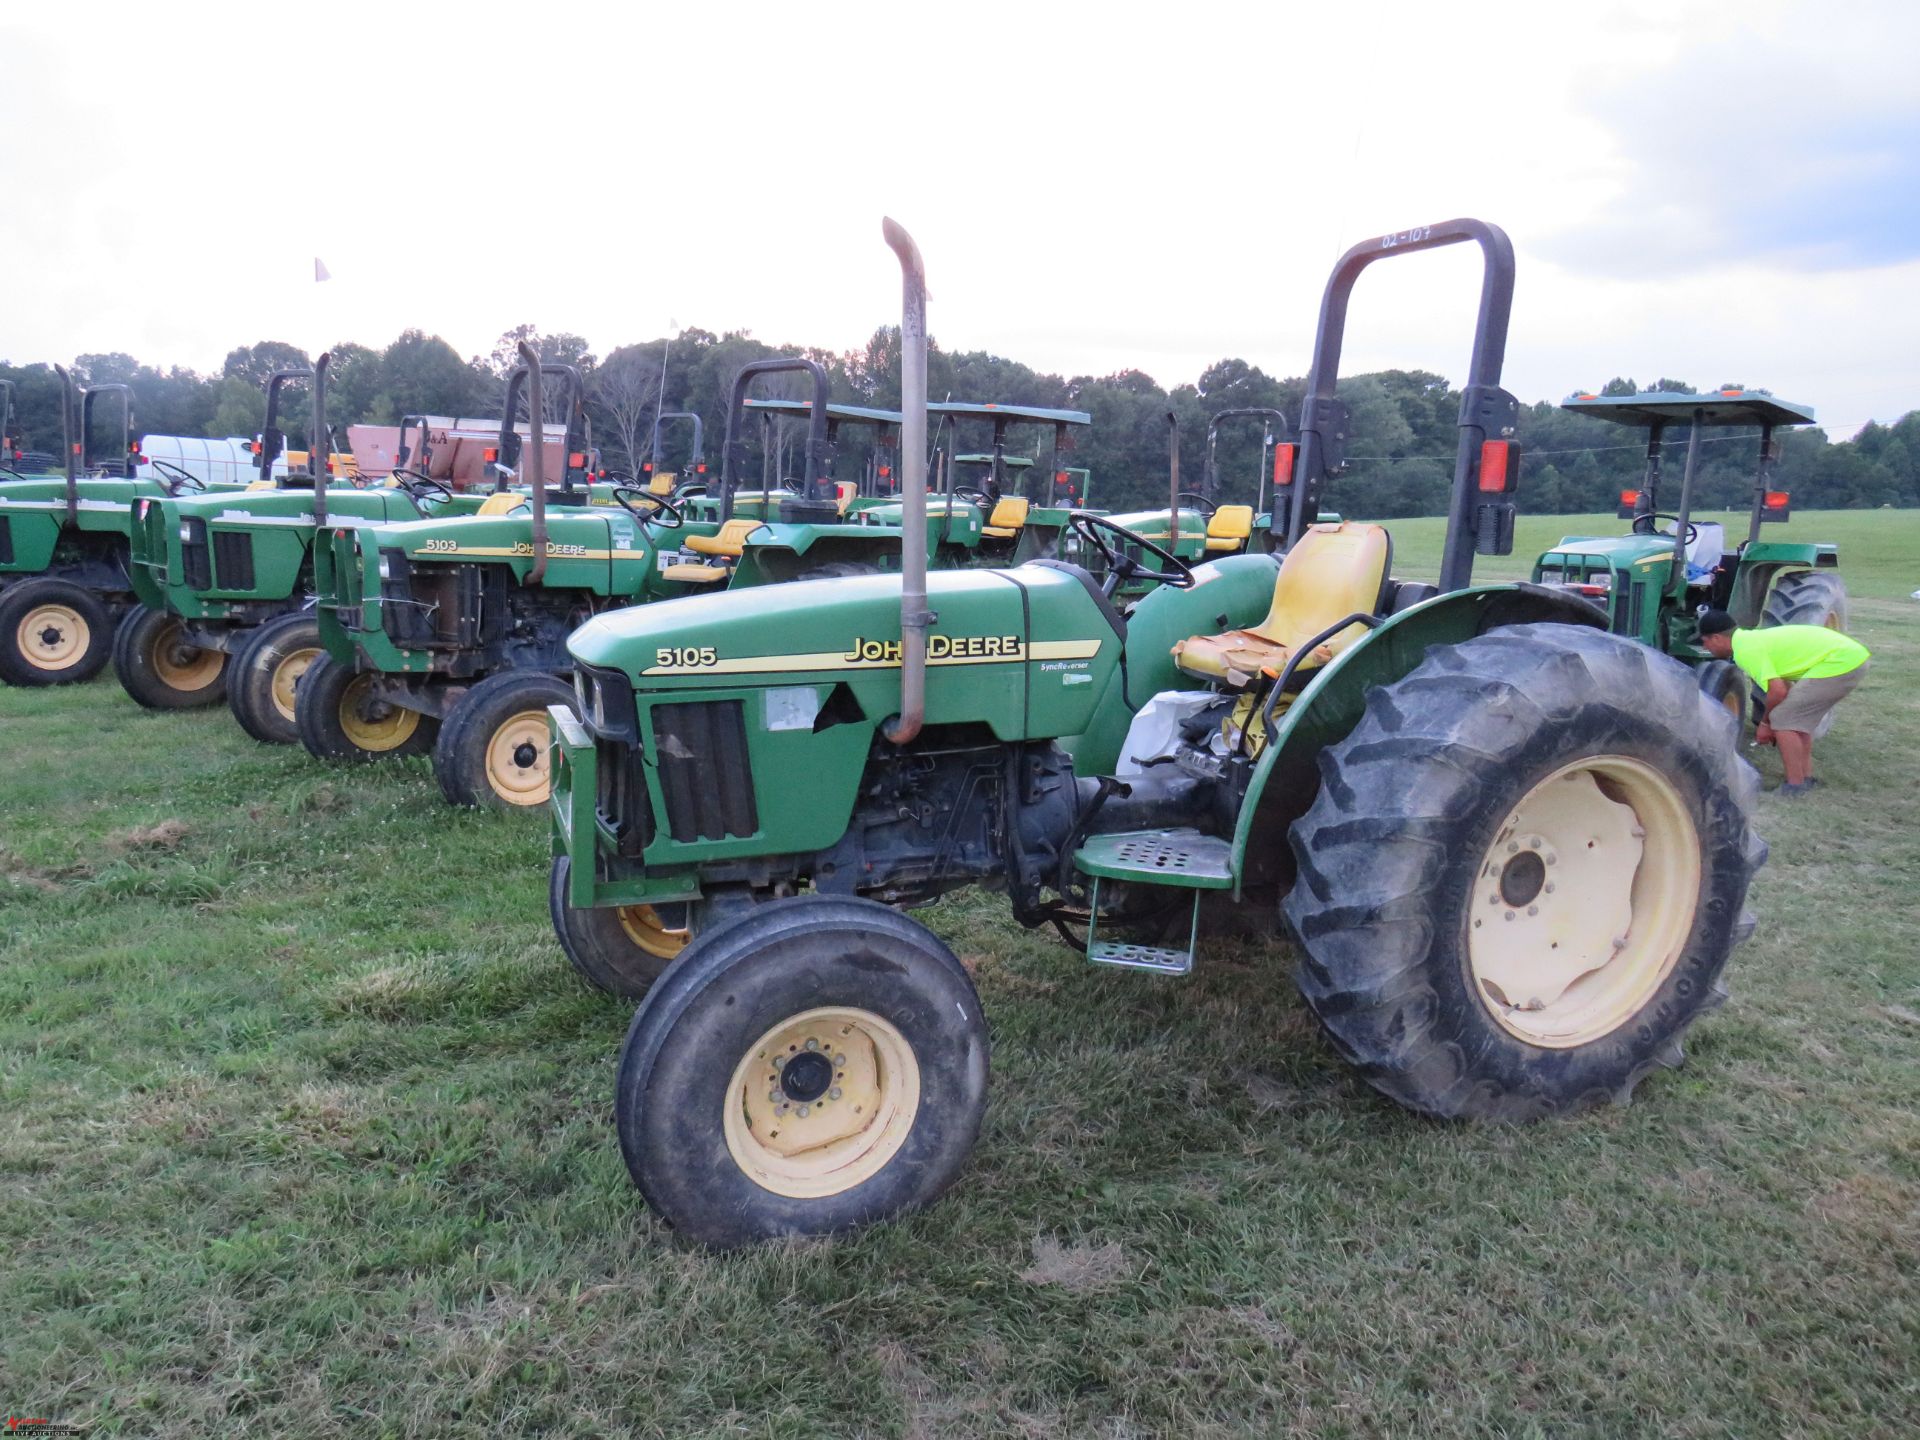 2004 JOHN DEERE 5105 TRACTOR, PTO, NO 3PT, 16.9-28 REAR TIRES, HOURS NOT AVAILABLE ON THIS UNIT, S/N